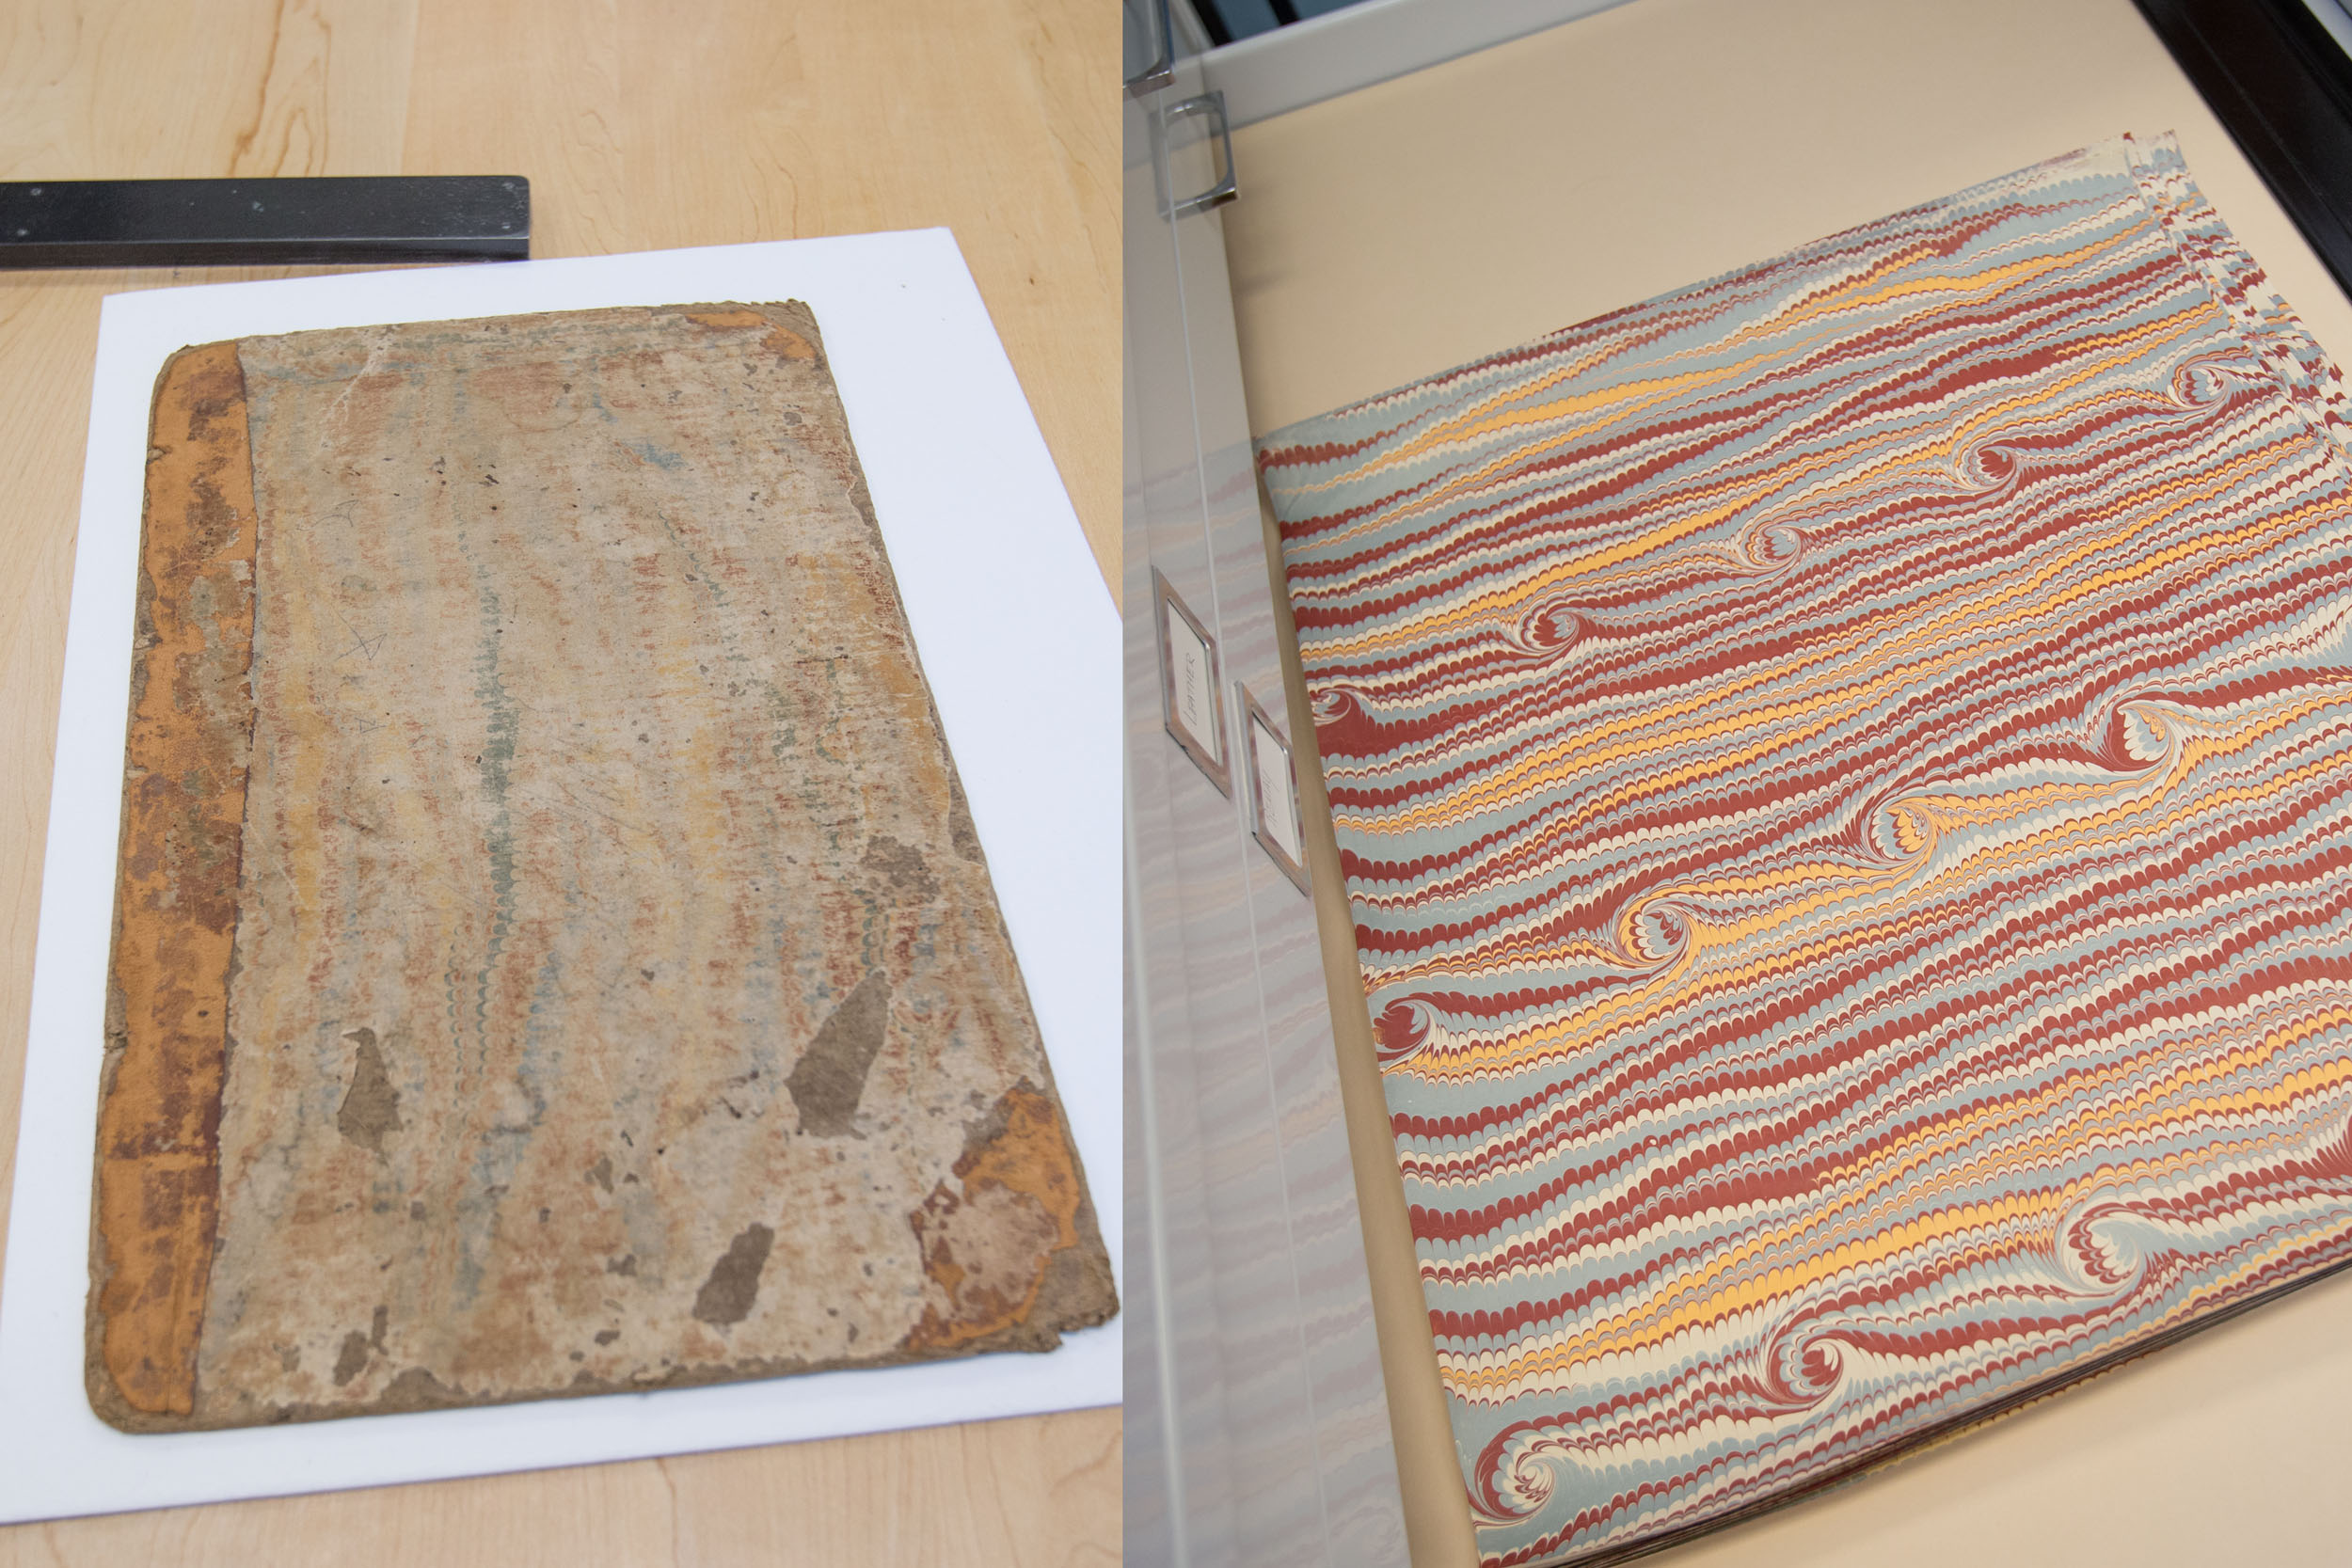 The book’s new cover paper was marbled to mimic its original design.